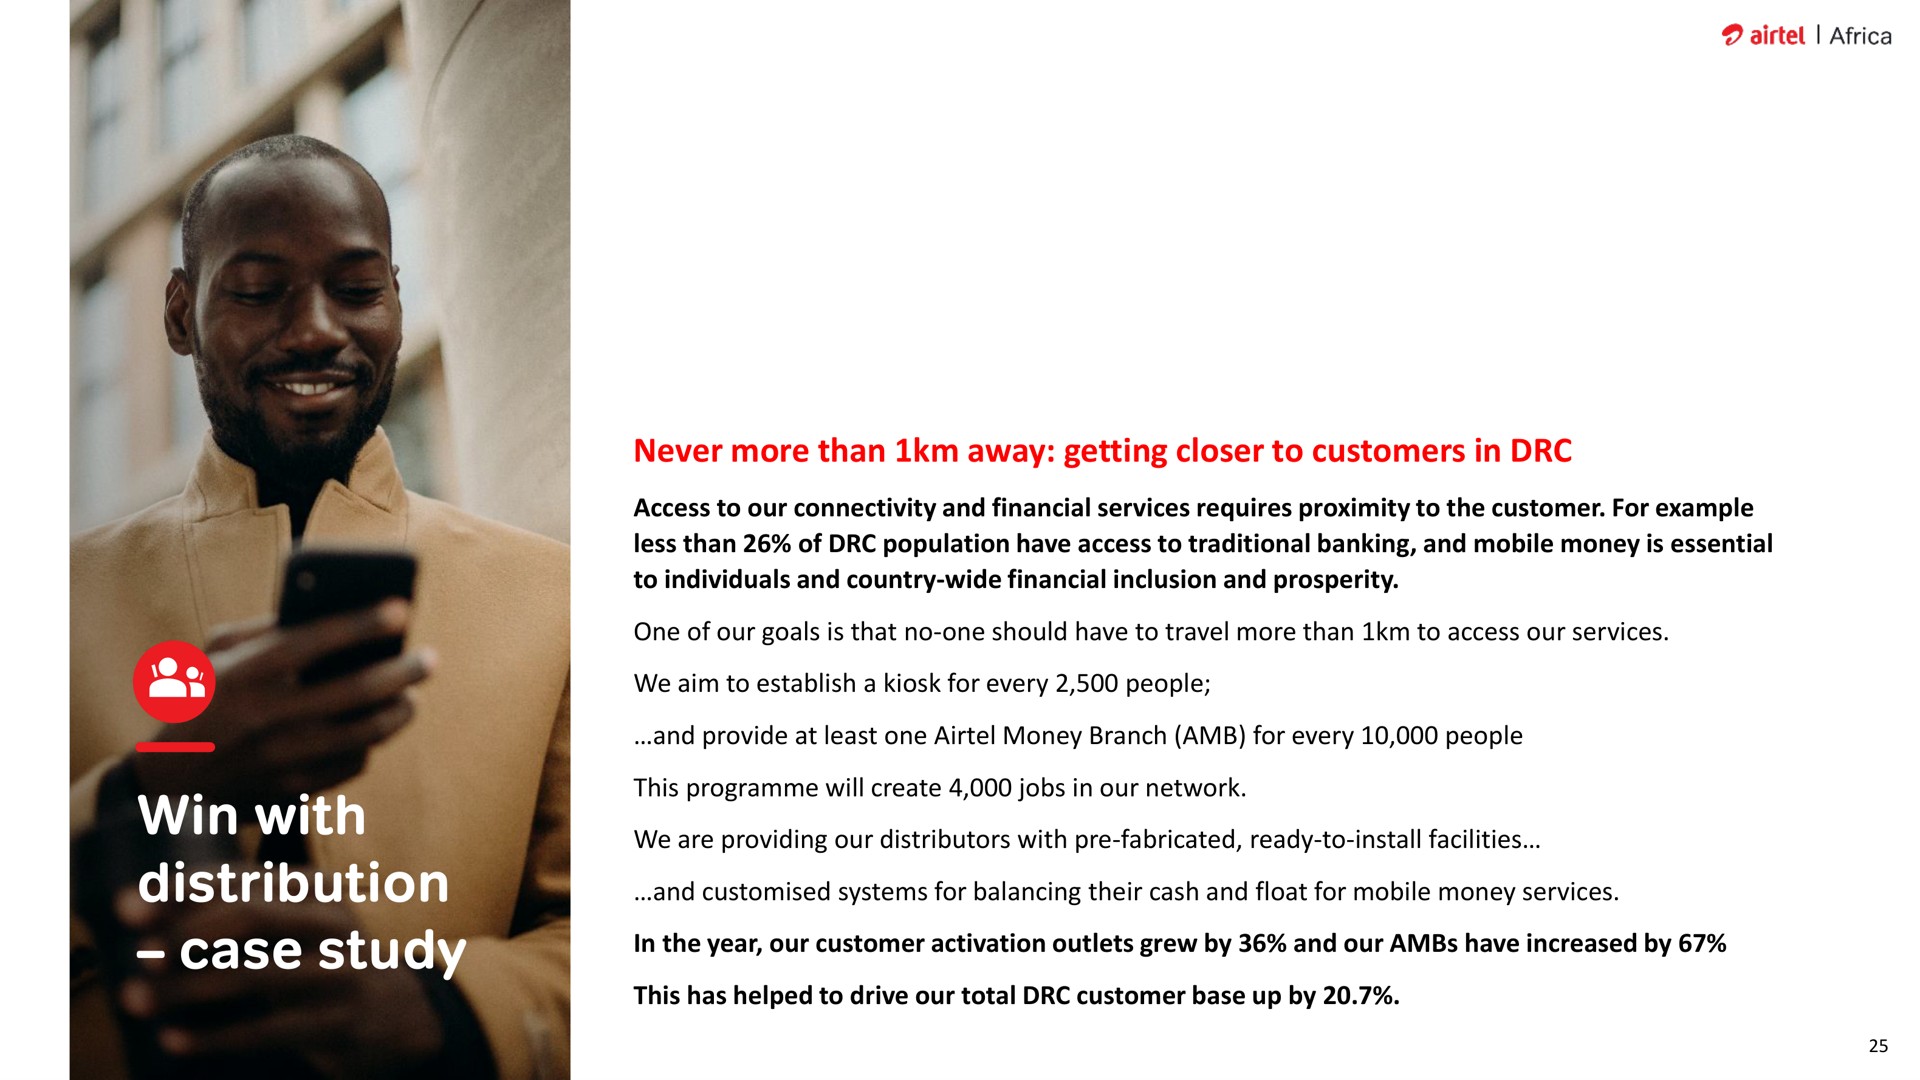 win with distribution case study never more than away getting closer to customers in | Airtel Africa